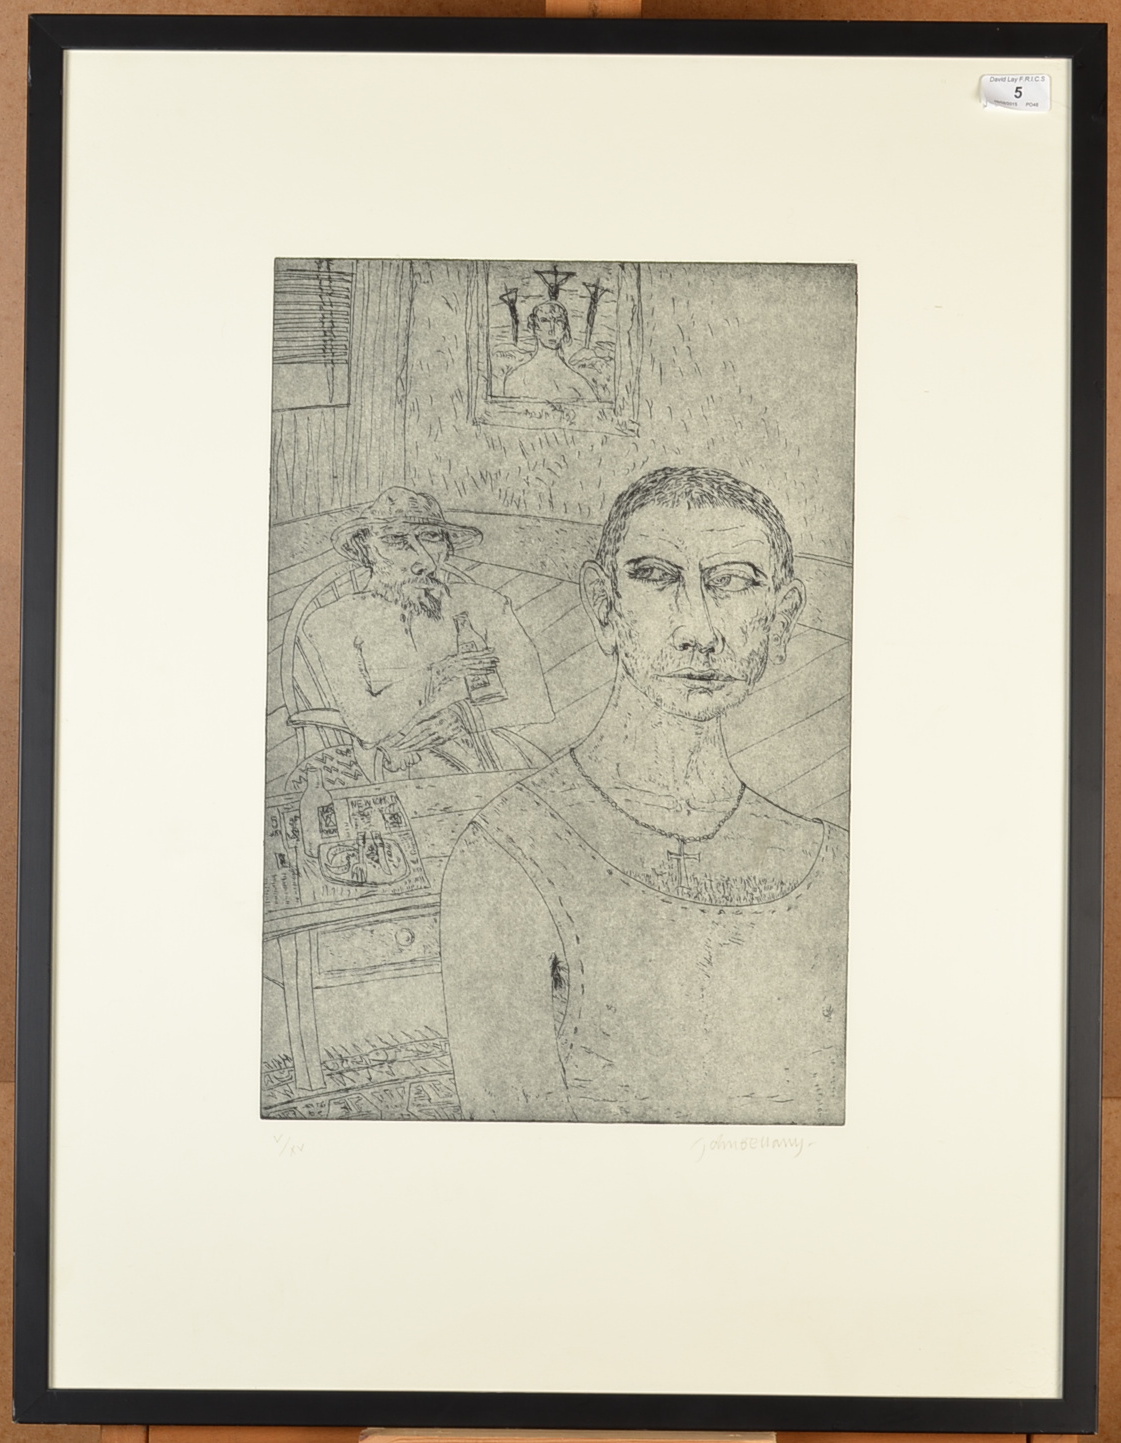 JOHN BELLAMY
The modern day Christ
Etching
Signed and numbered 5 from an edition of 15
48 x 32cm